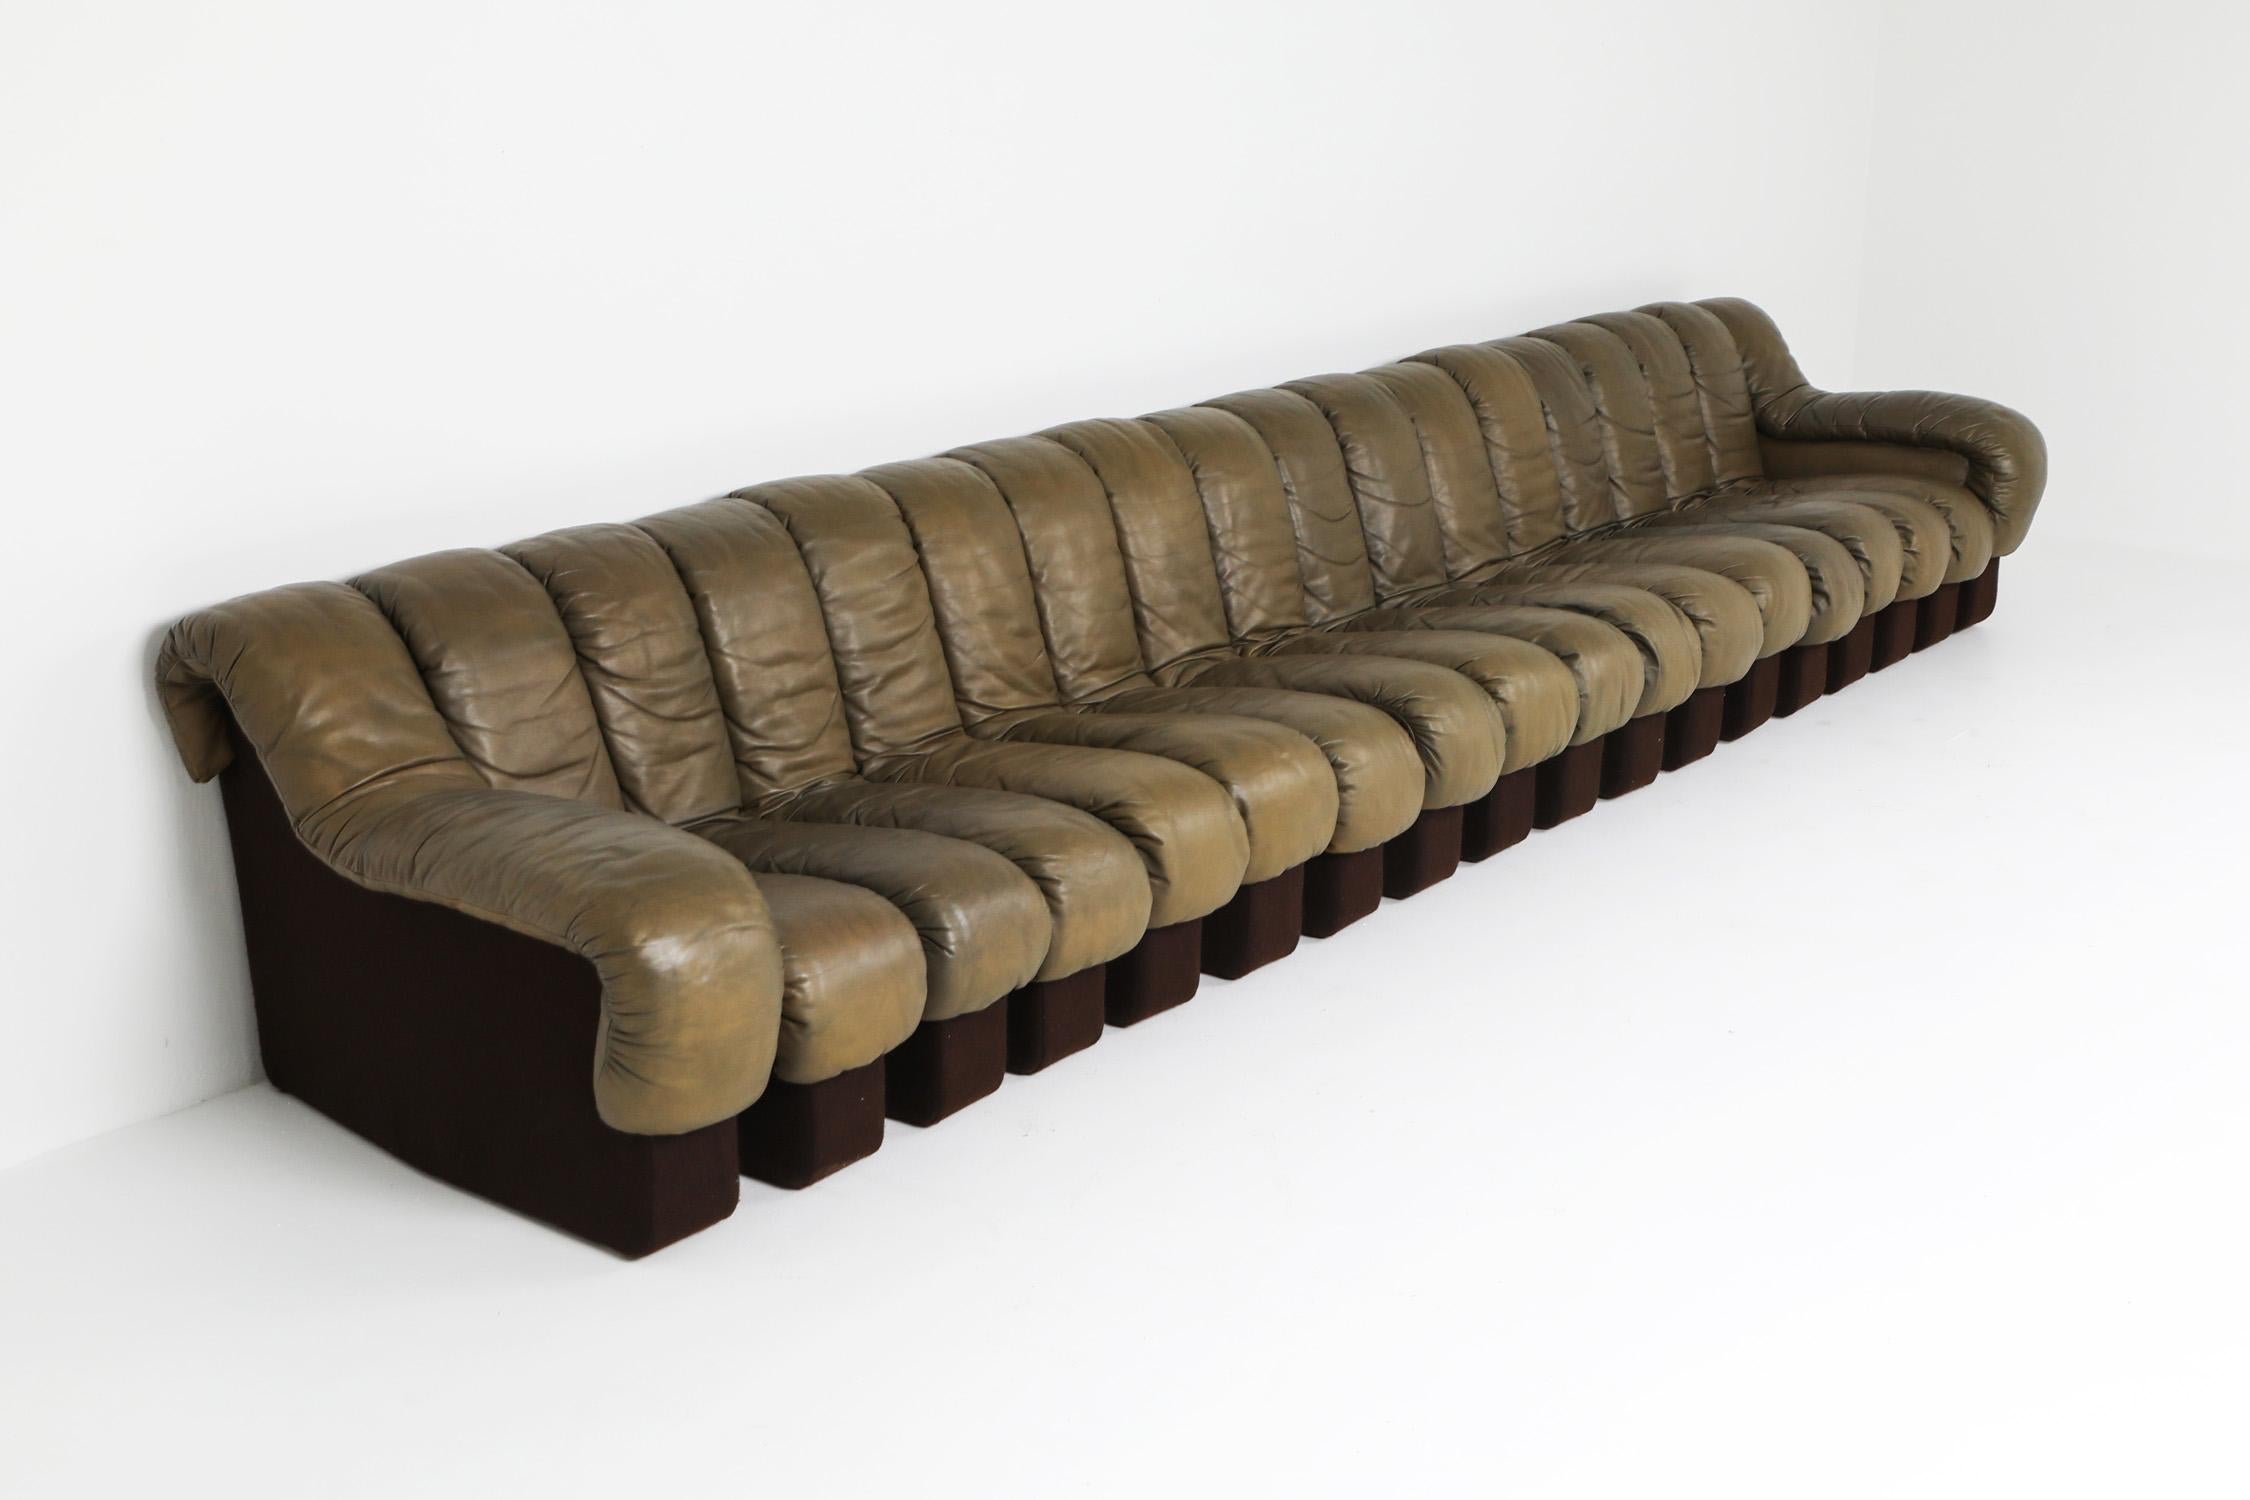 De Sede ‘Snake’ DS-600, in original green colored leather, Switzerland, 1972.
De Sede 'Non Stop' sectional sofa containing twenty pieces in green leather, of which 18 centre pieces and two higher armrests.
Any number of pieces can be zipped